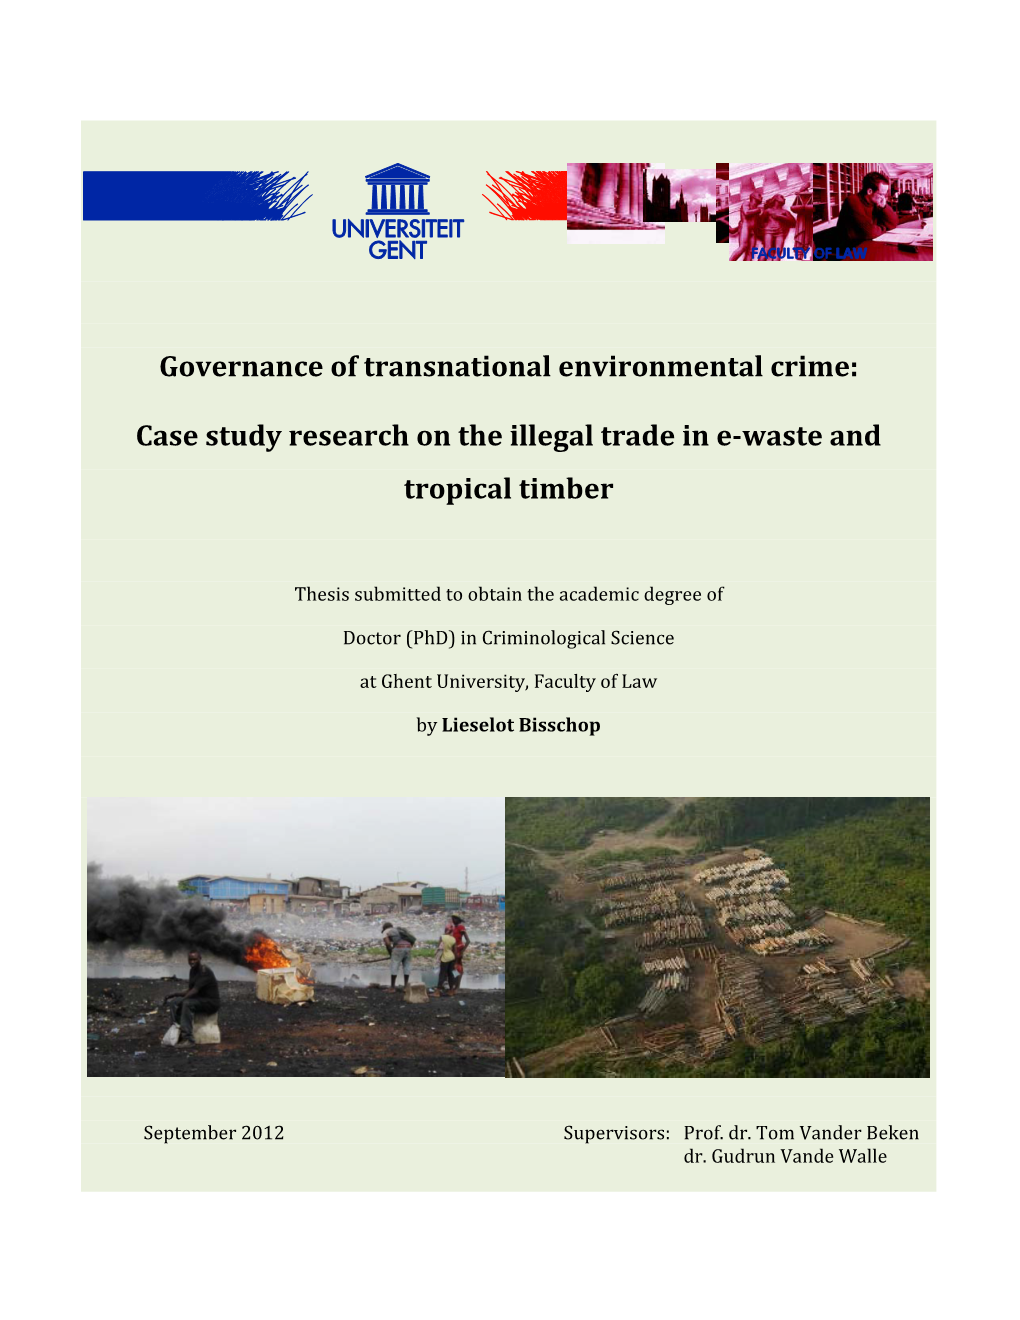 Case Study Research on the Illegal Trade in E-Waste and Tropical Timber